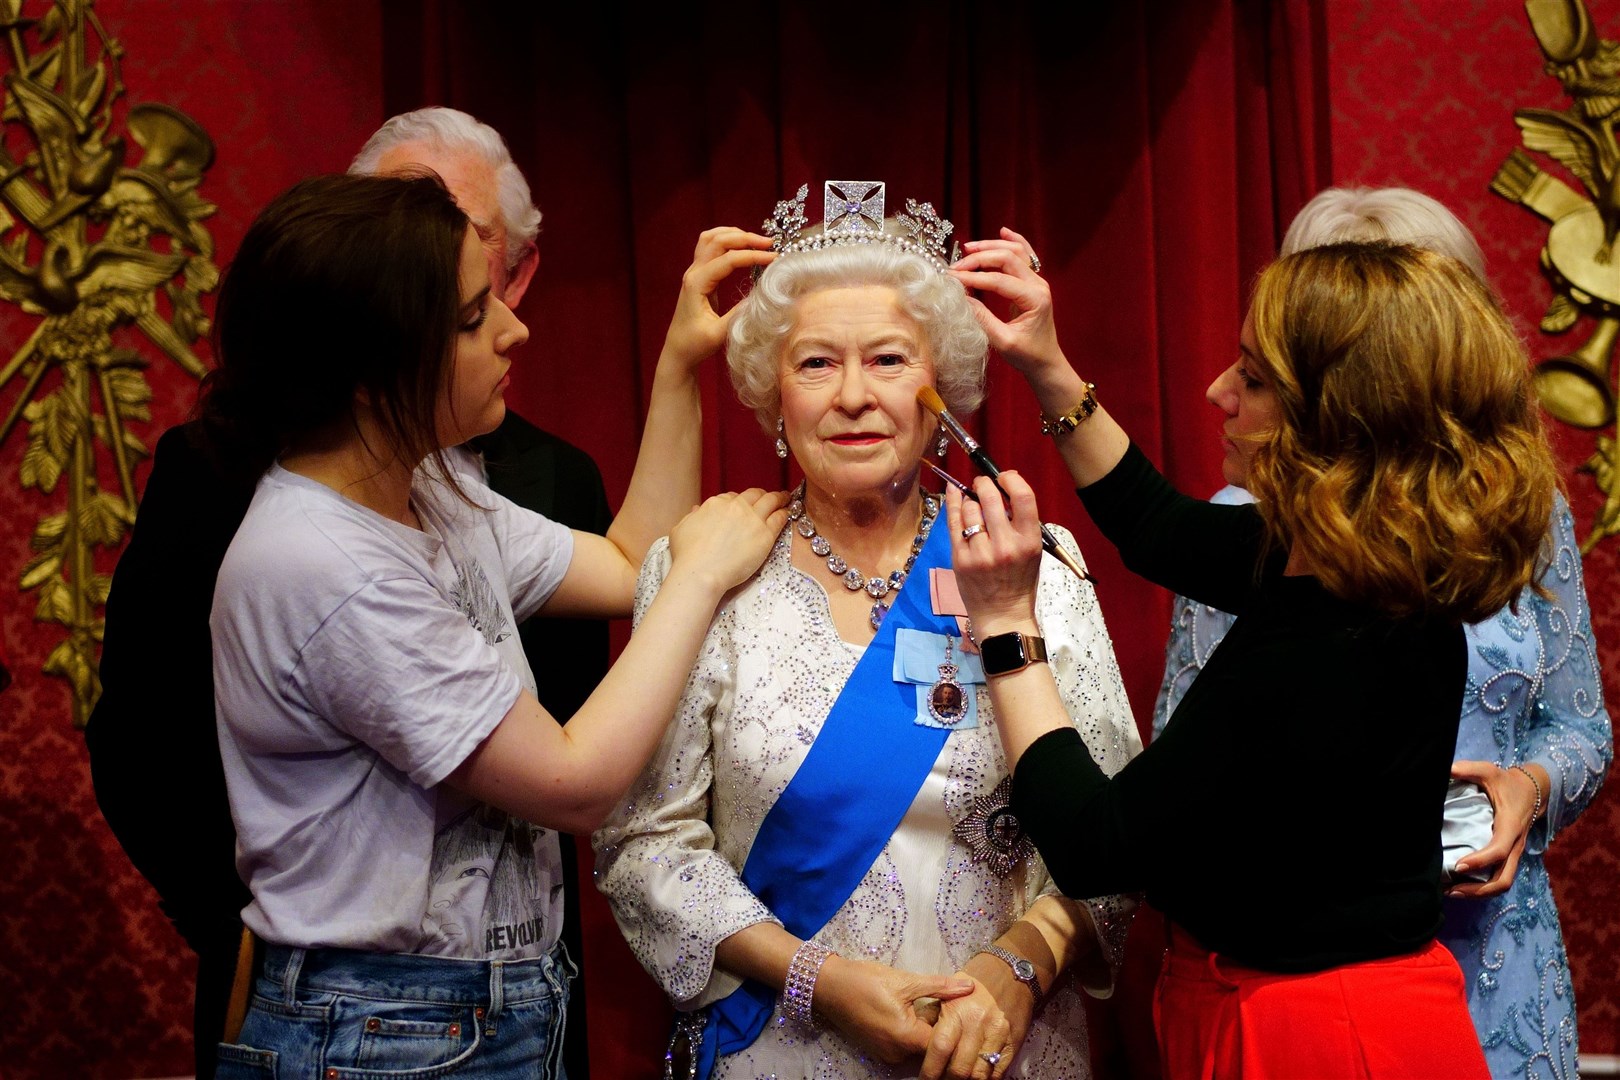 Studio artists Luisa Compobassi (left) and Jo Kinsey (right) make their final touches to the wax figure of Queen Elizabeth II at Madame Tussauds London ahead the Platinum Jubilee celebrations. (PA)